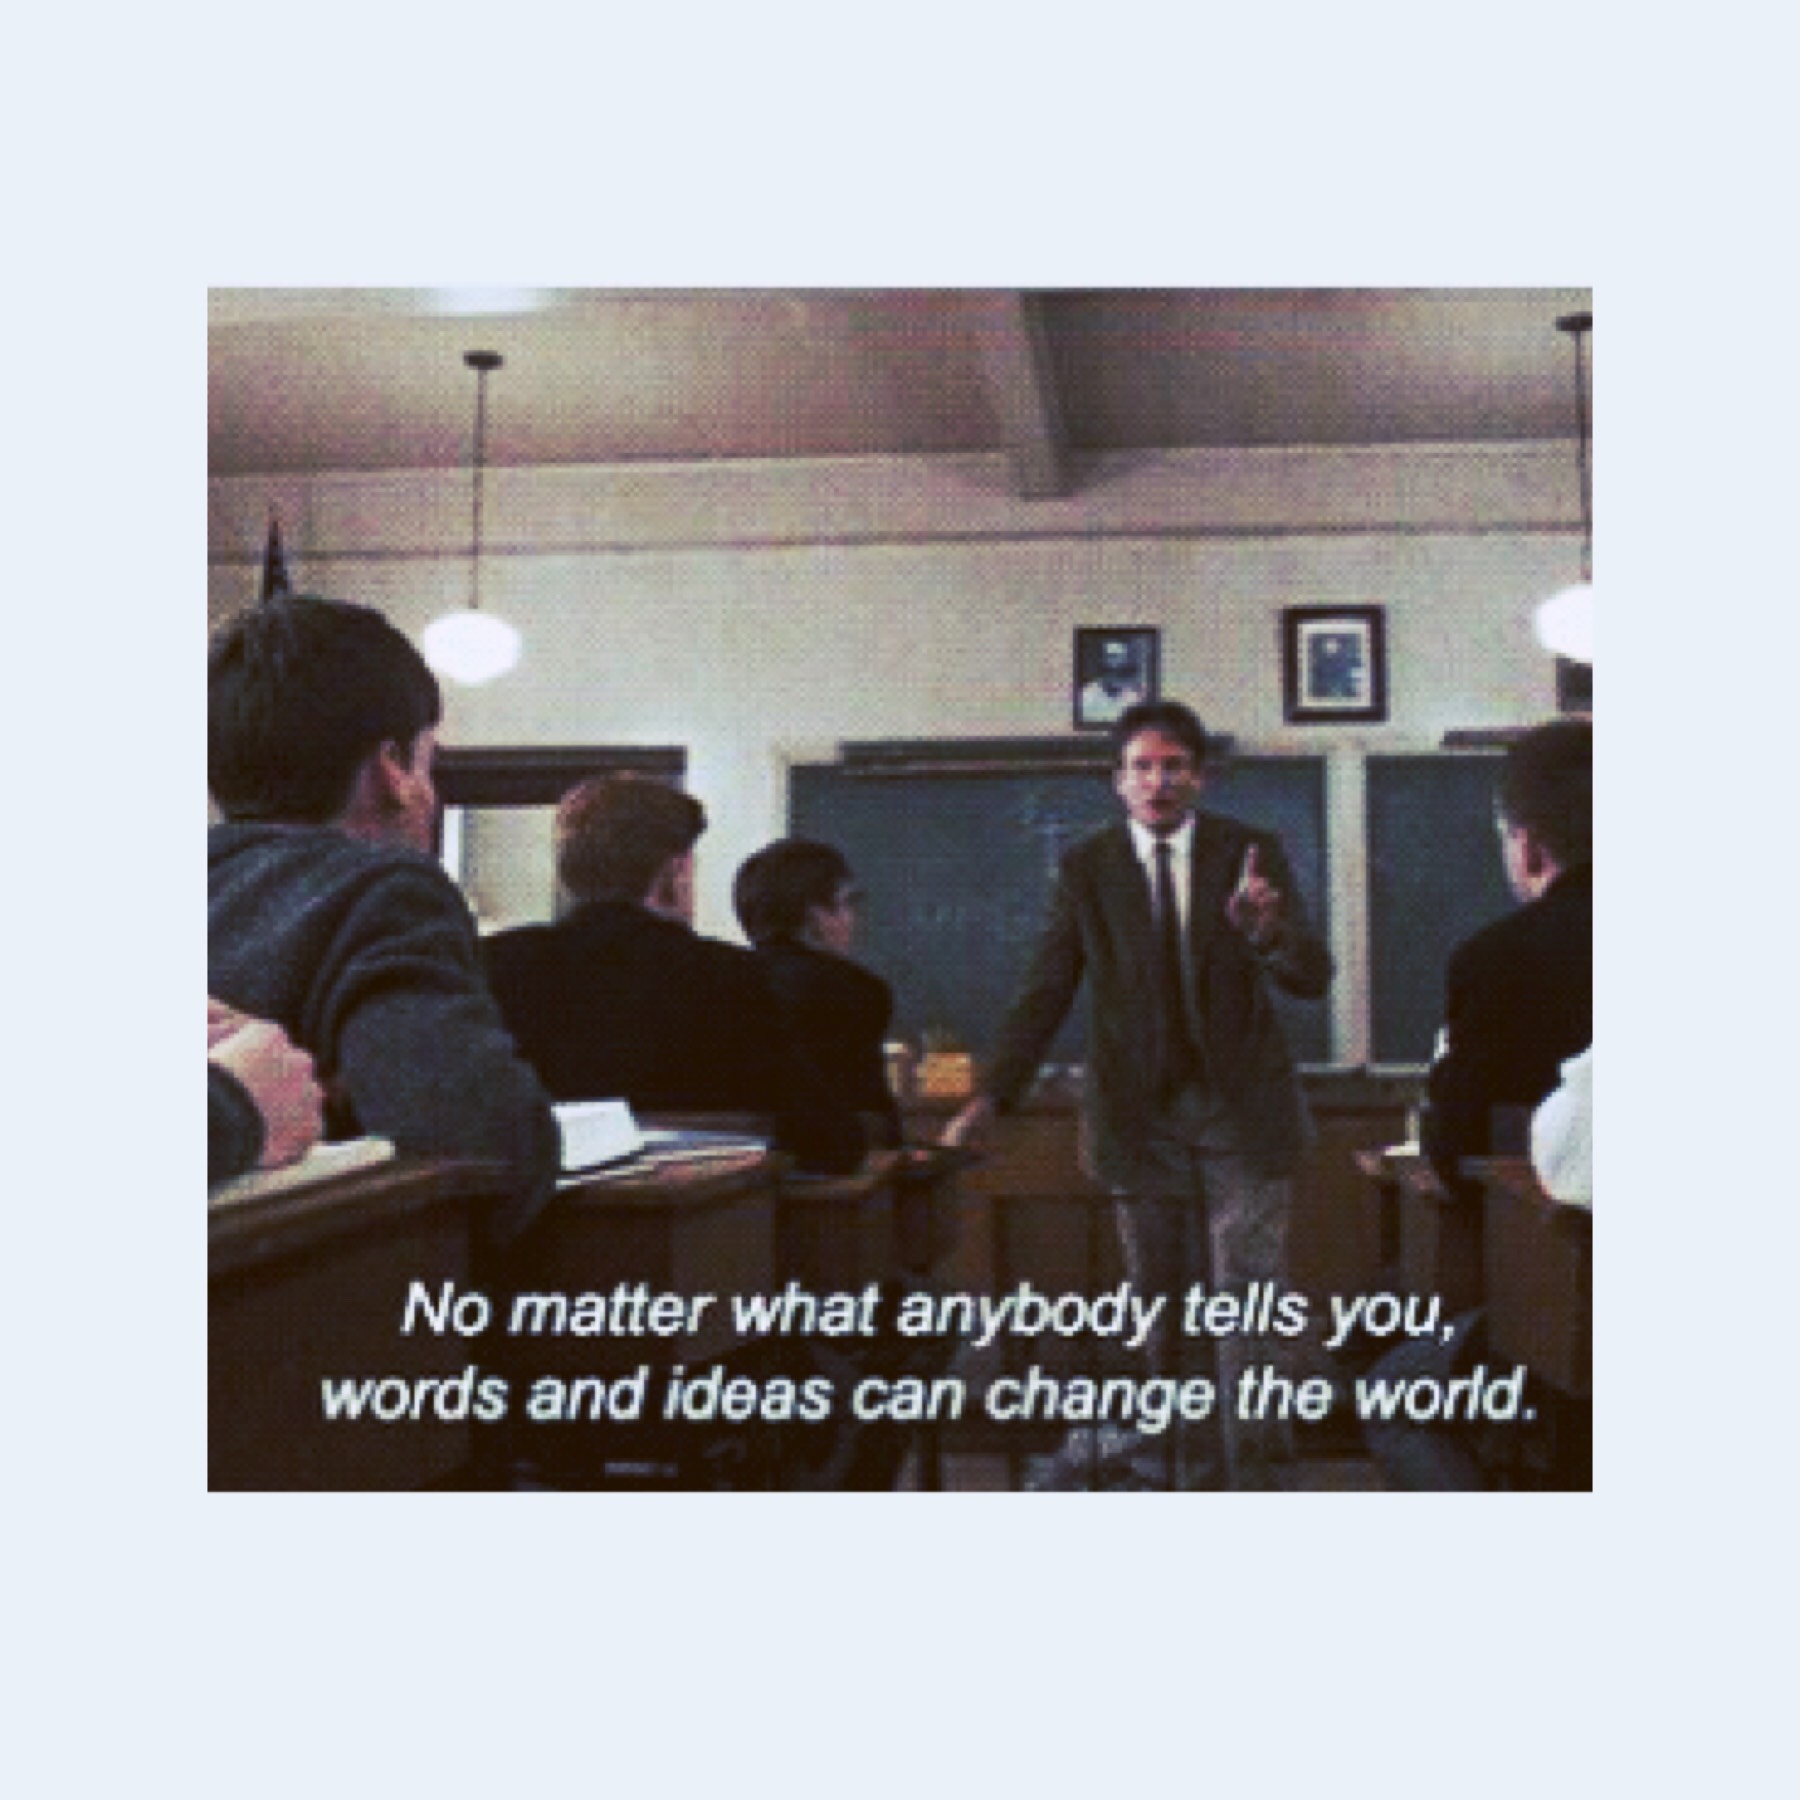 I watched Dead Poets Society last night and wow I’ve been sleeping on this movie tbh. it was so frickin good. my dad showed it to me a couple years ago but it was halfway through the movie so I didn’t know what was going on but yeah I think this is my fav